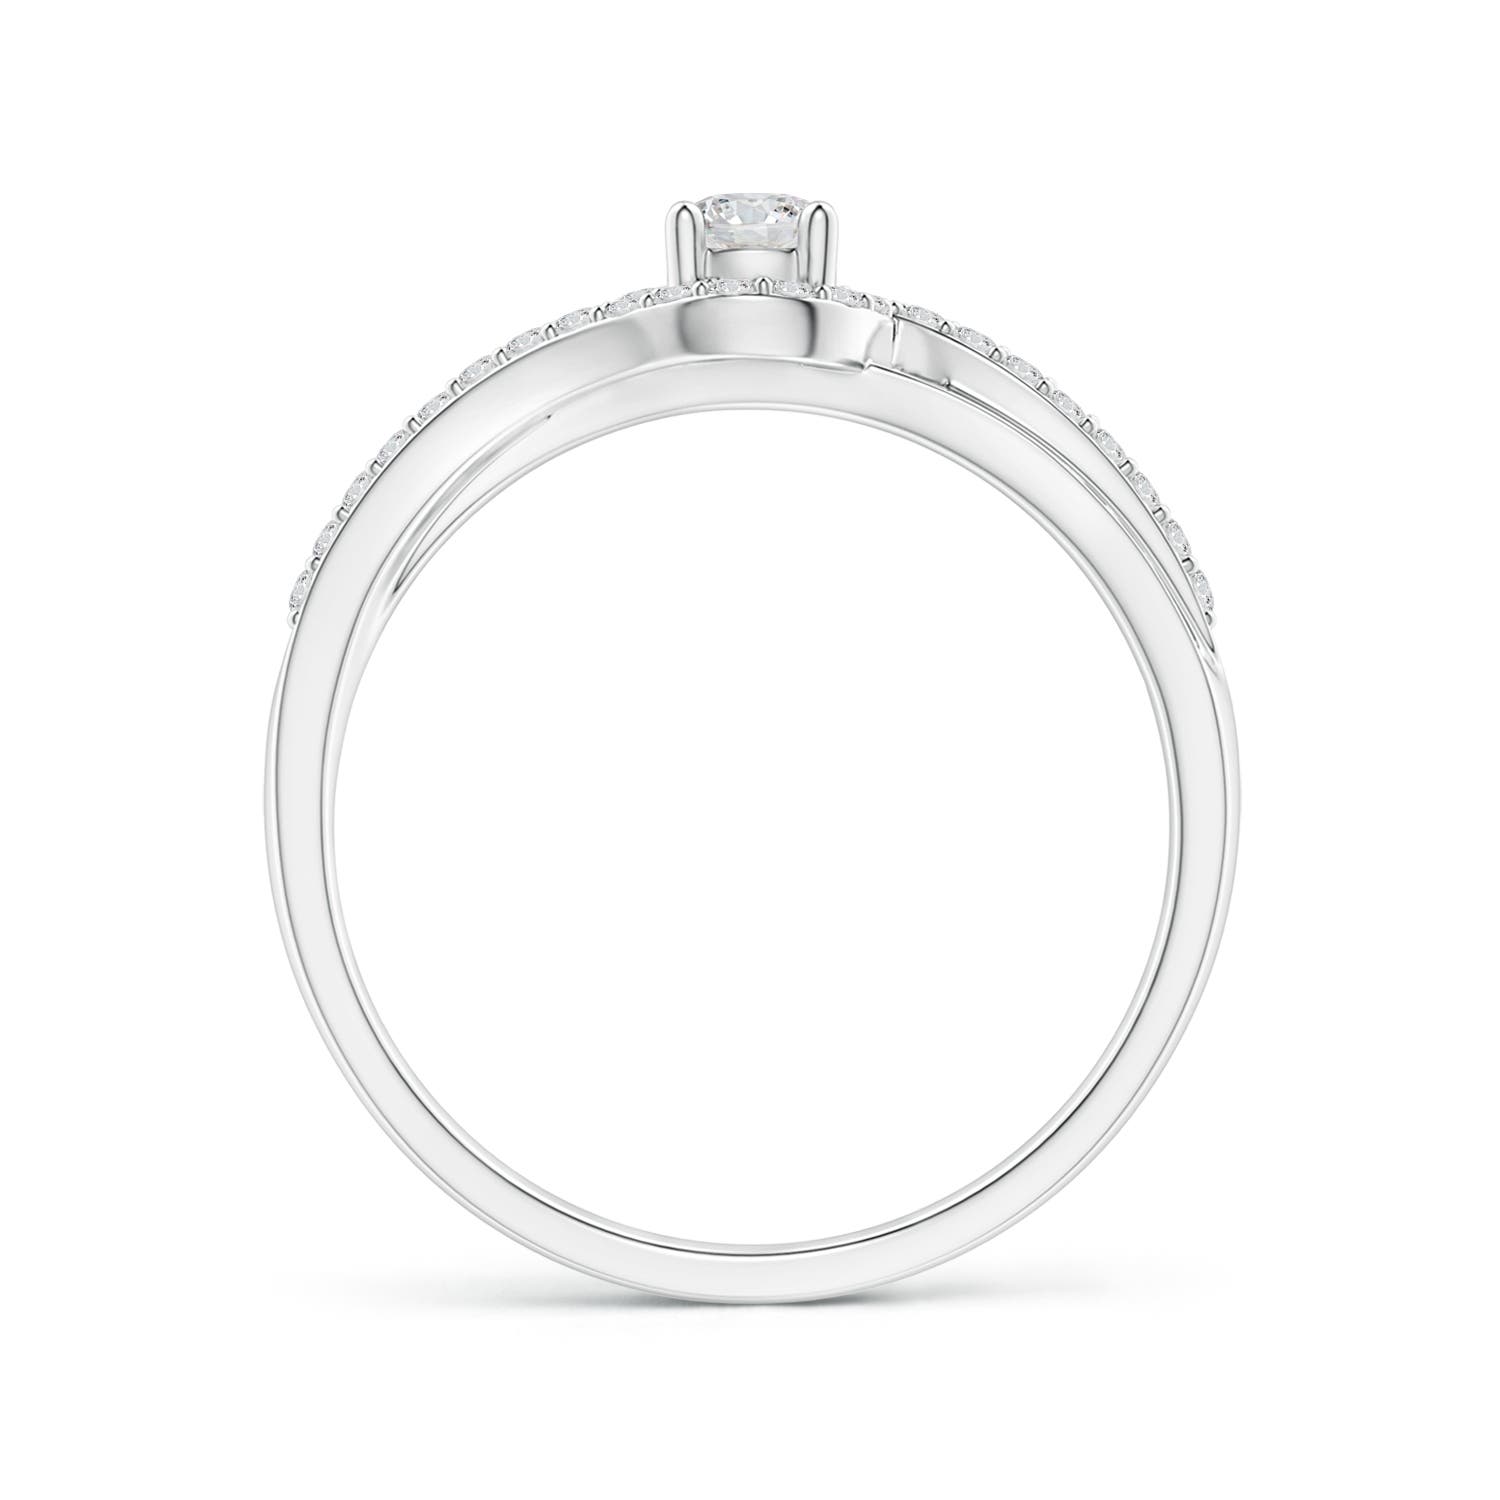 H, SI2 / 0.41 CT / 14 KT White Gold